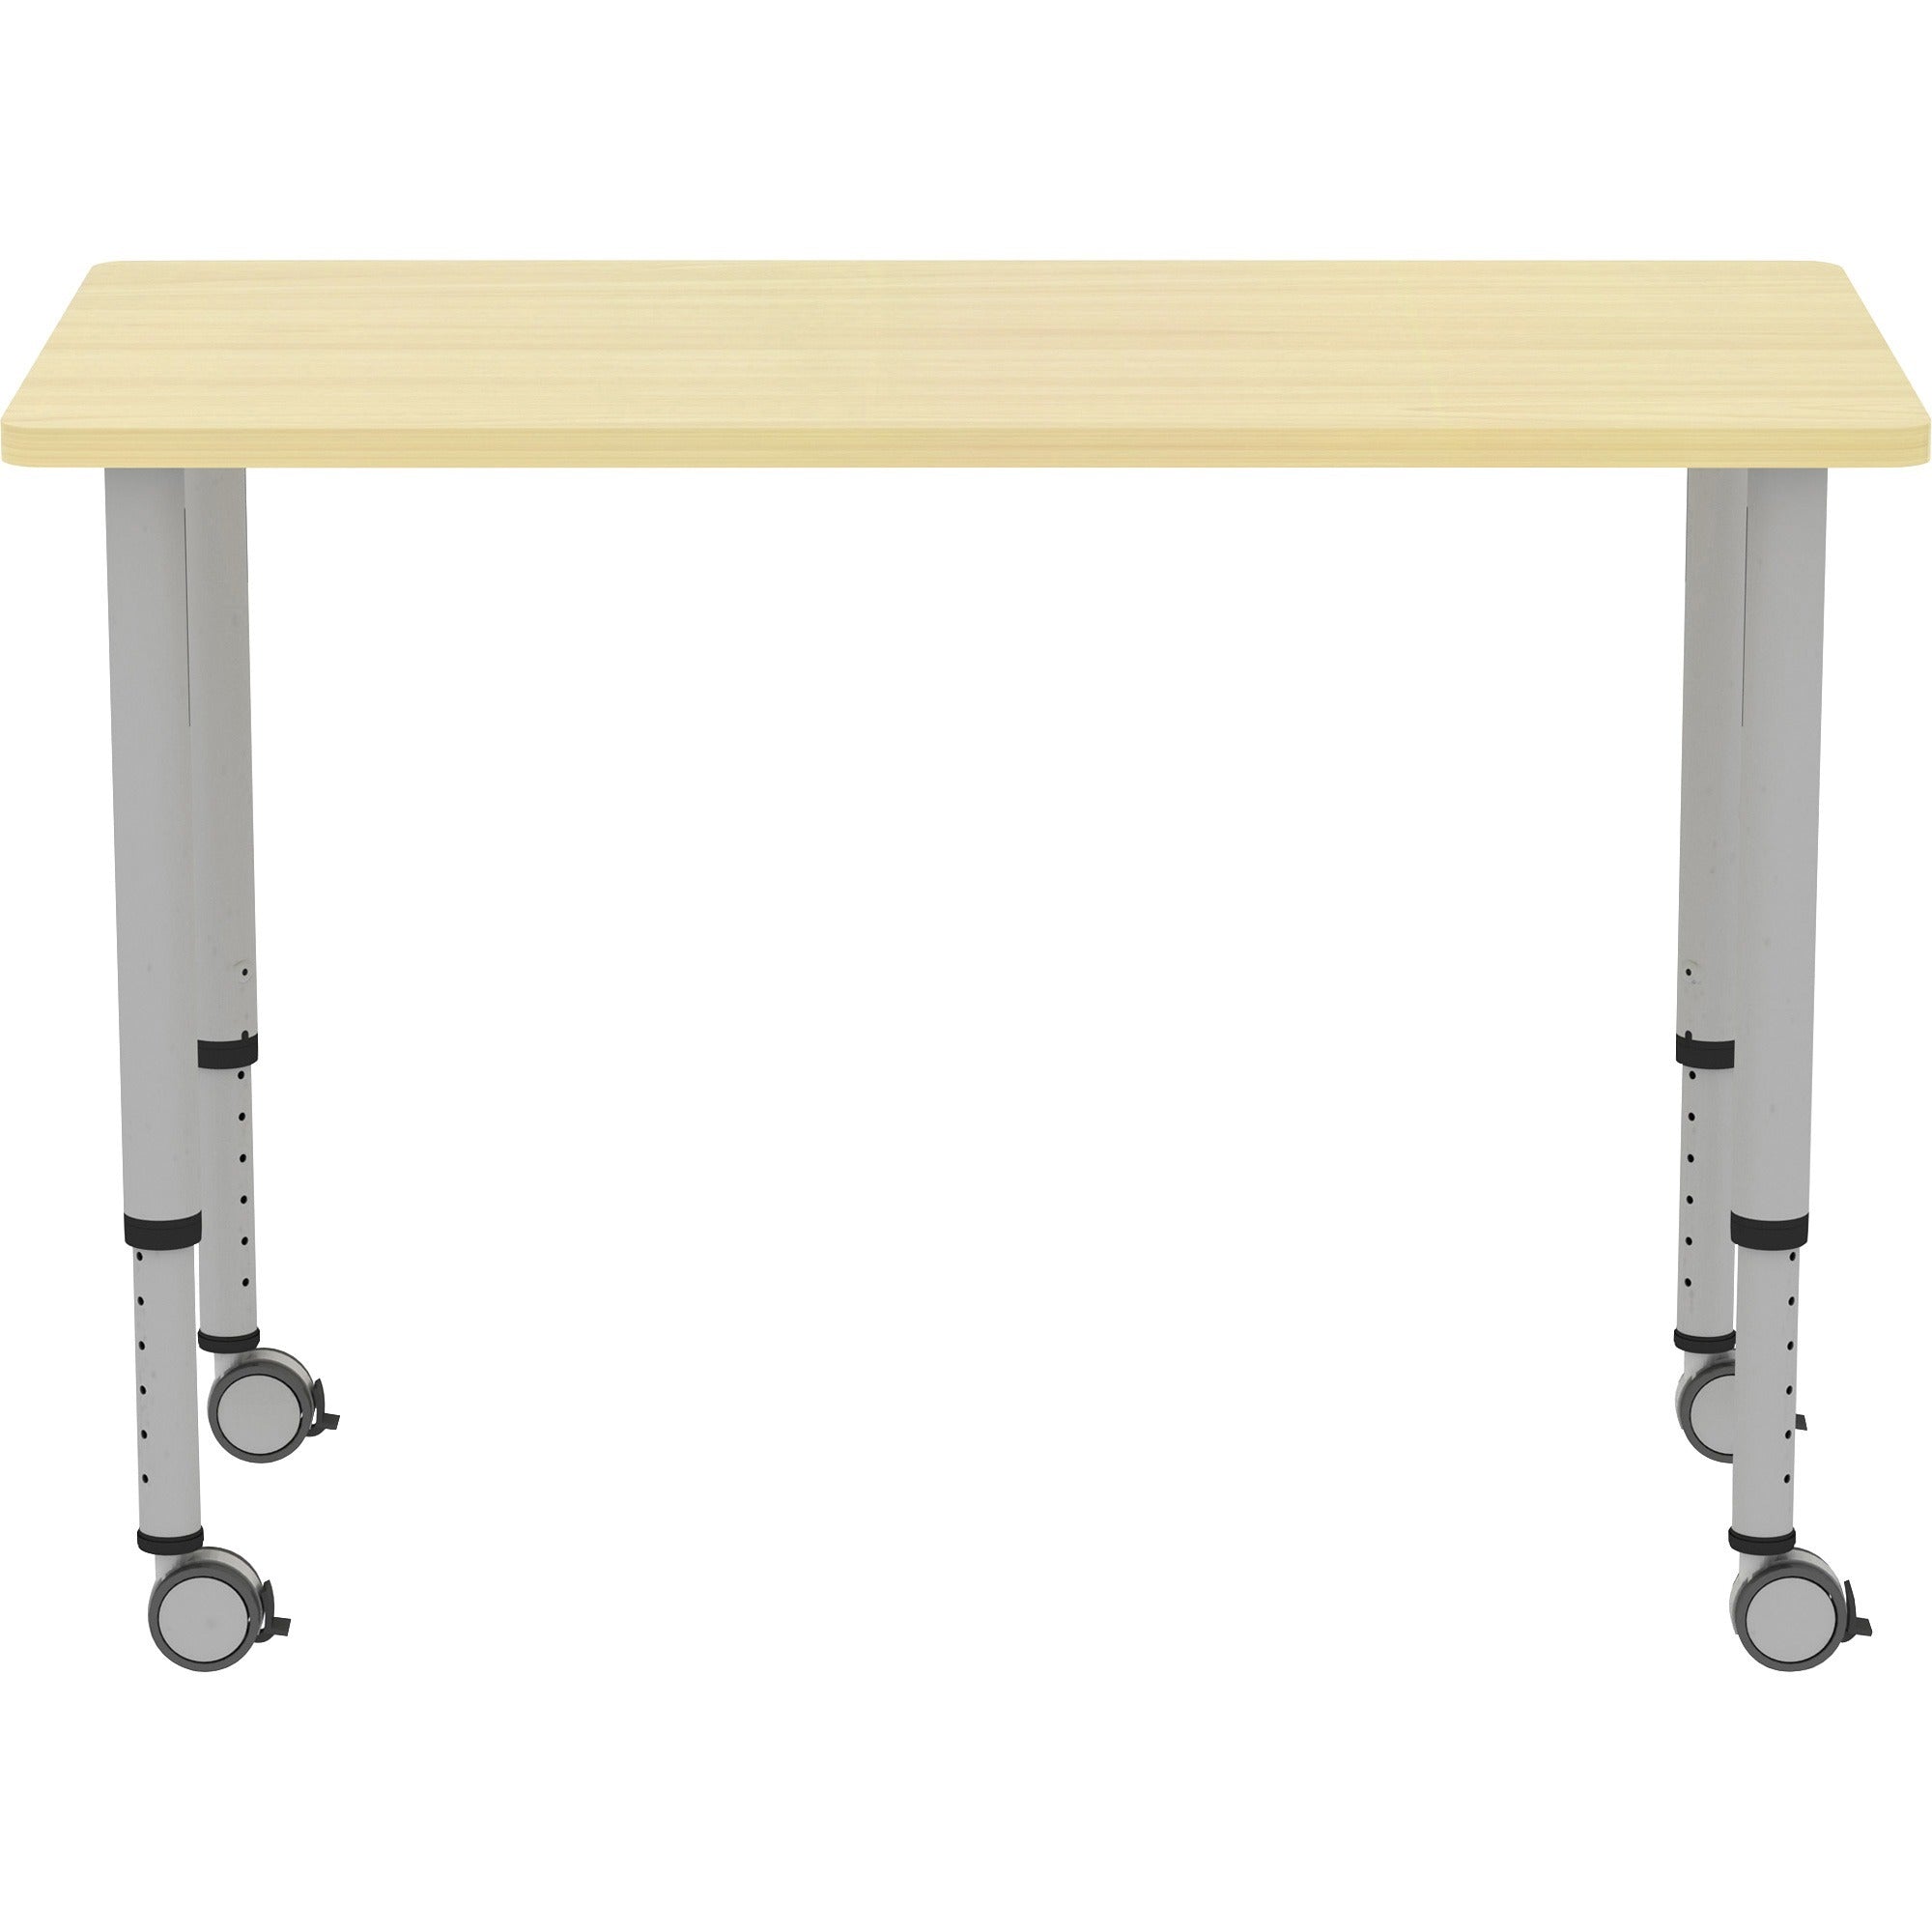 lorell-attune-height-adjustable-multipurpose-rectangular-table-for-table-toprectangle-top-adjustable-height-2662-to-3362-adjustment-x-48-table-top-width-x-2362-table-top-depth-3362-height-assembly-required-laminated-maple-la_llr69582 - 3